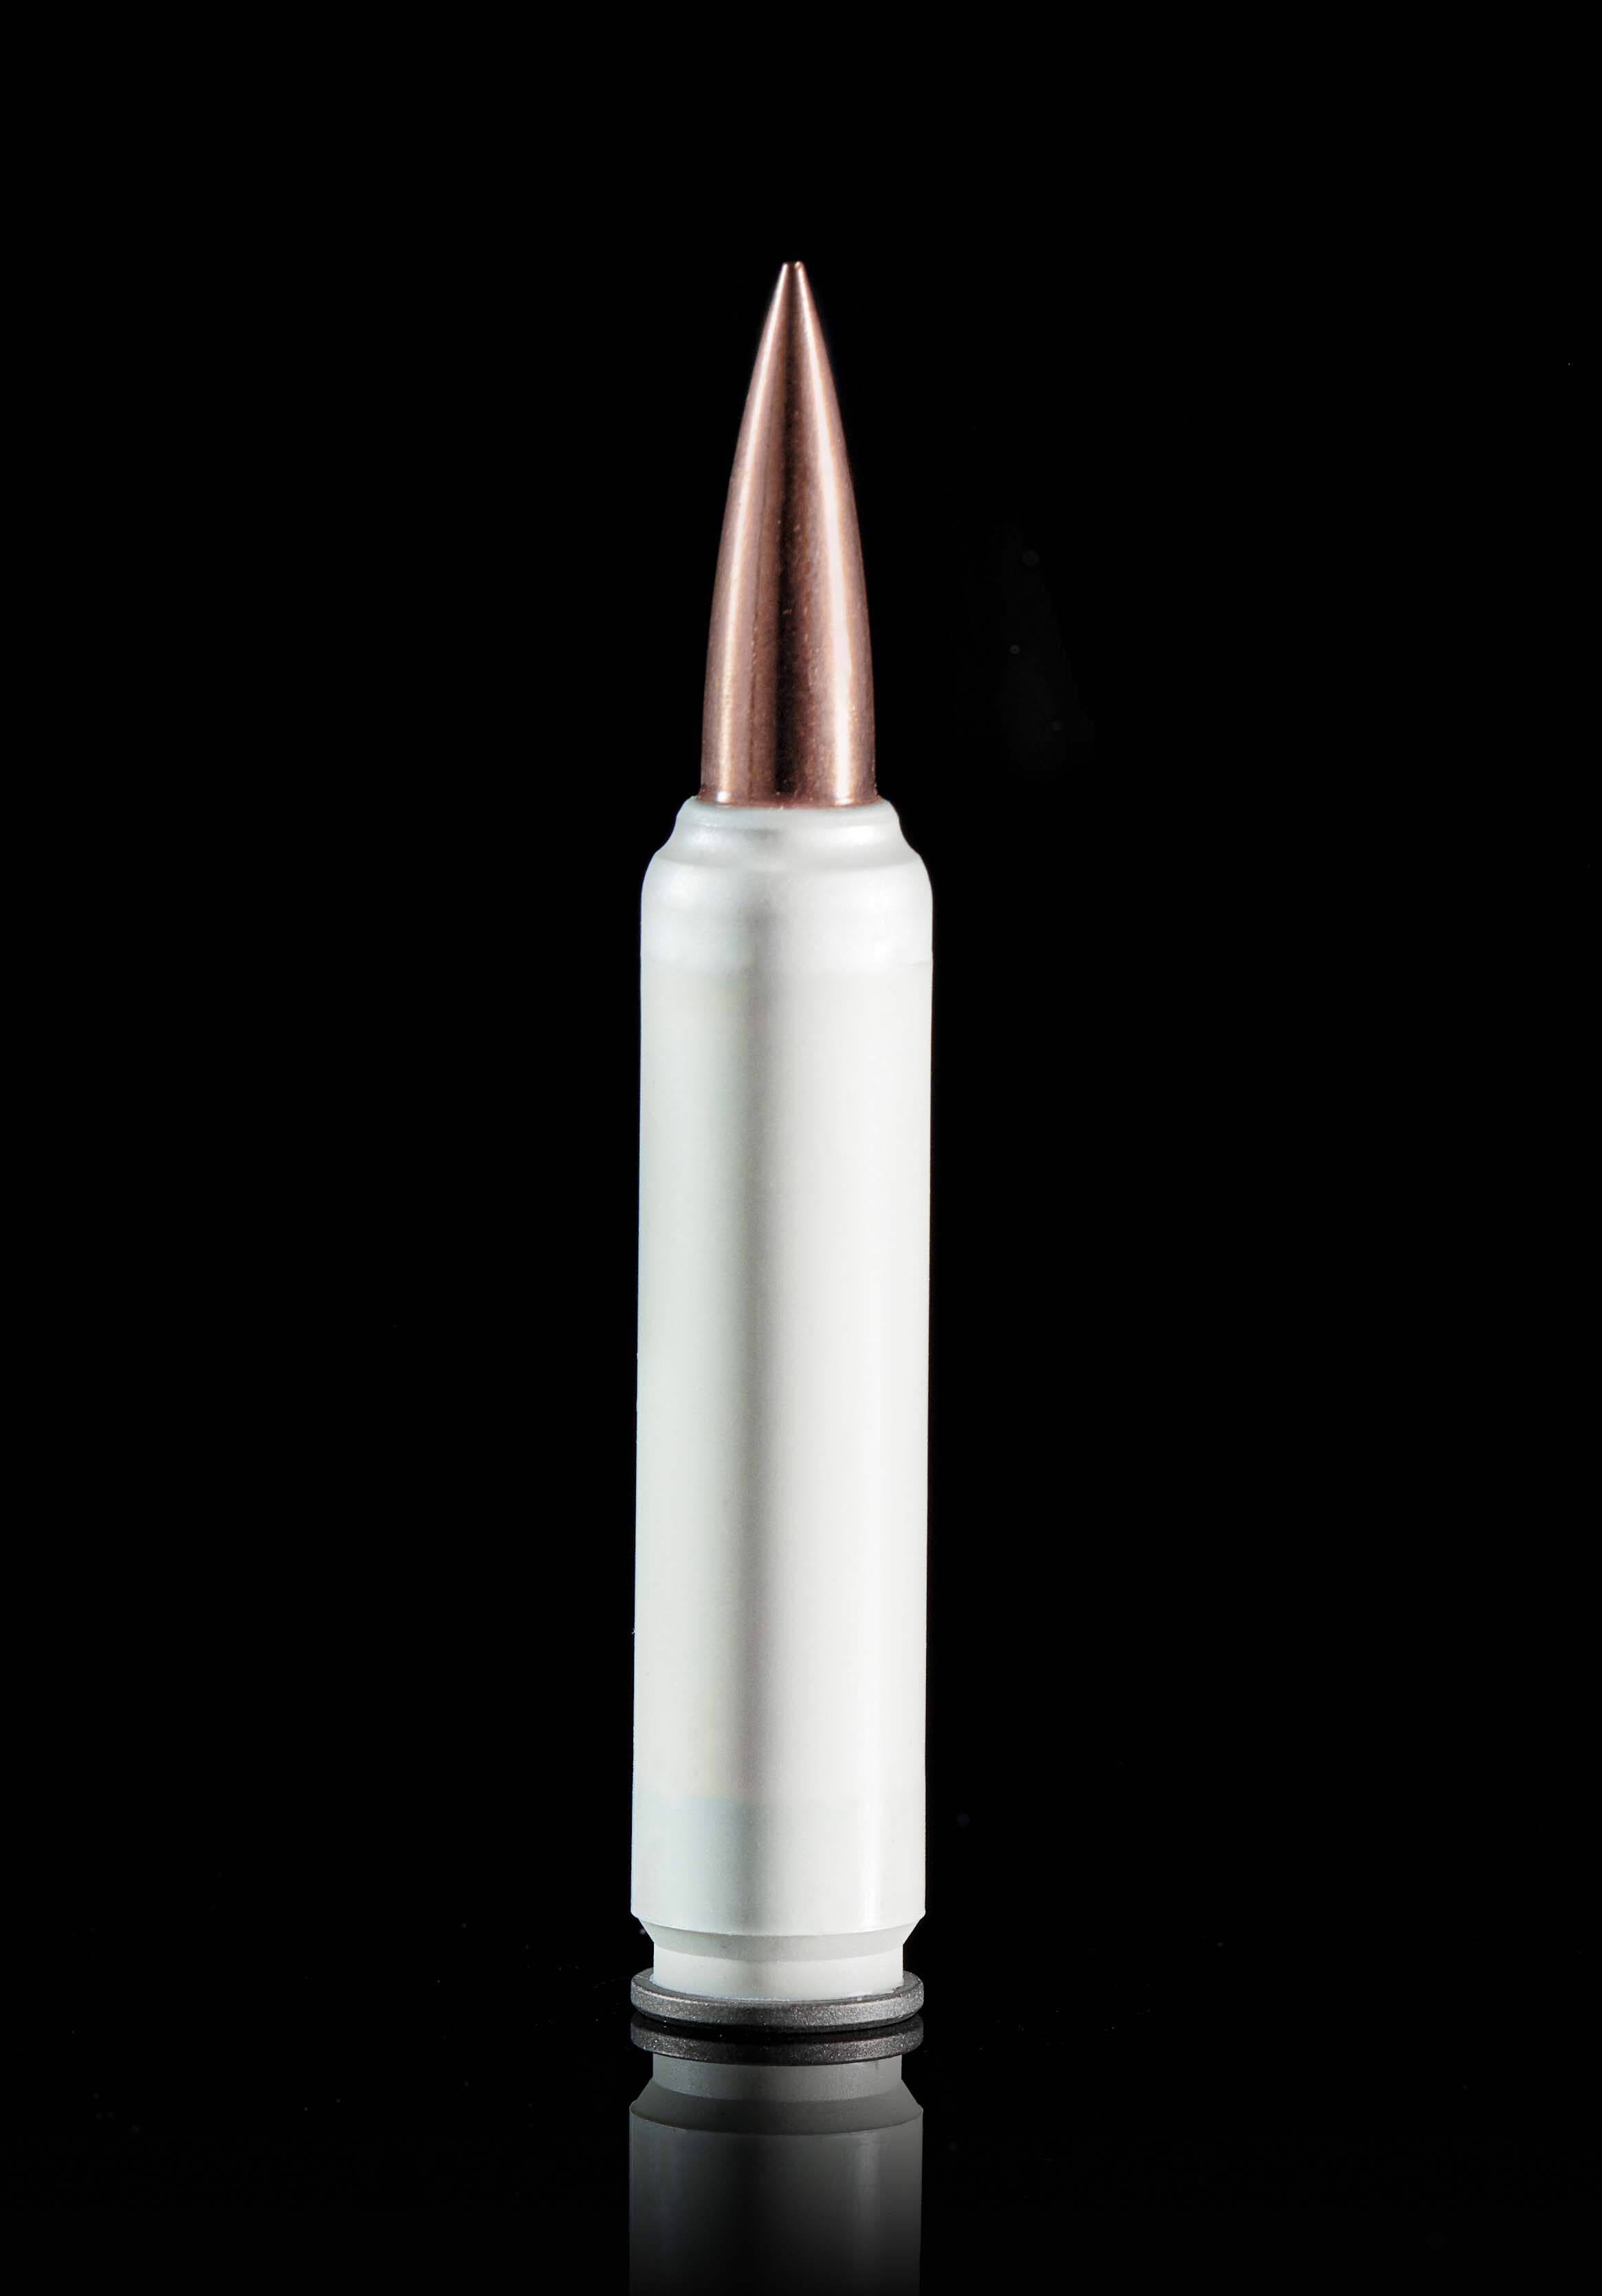 US Army Selects True Velocity Composite-Cased Ammunition For Next ...